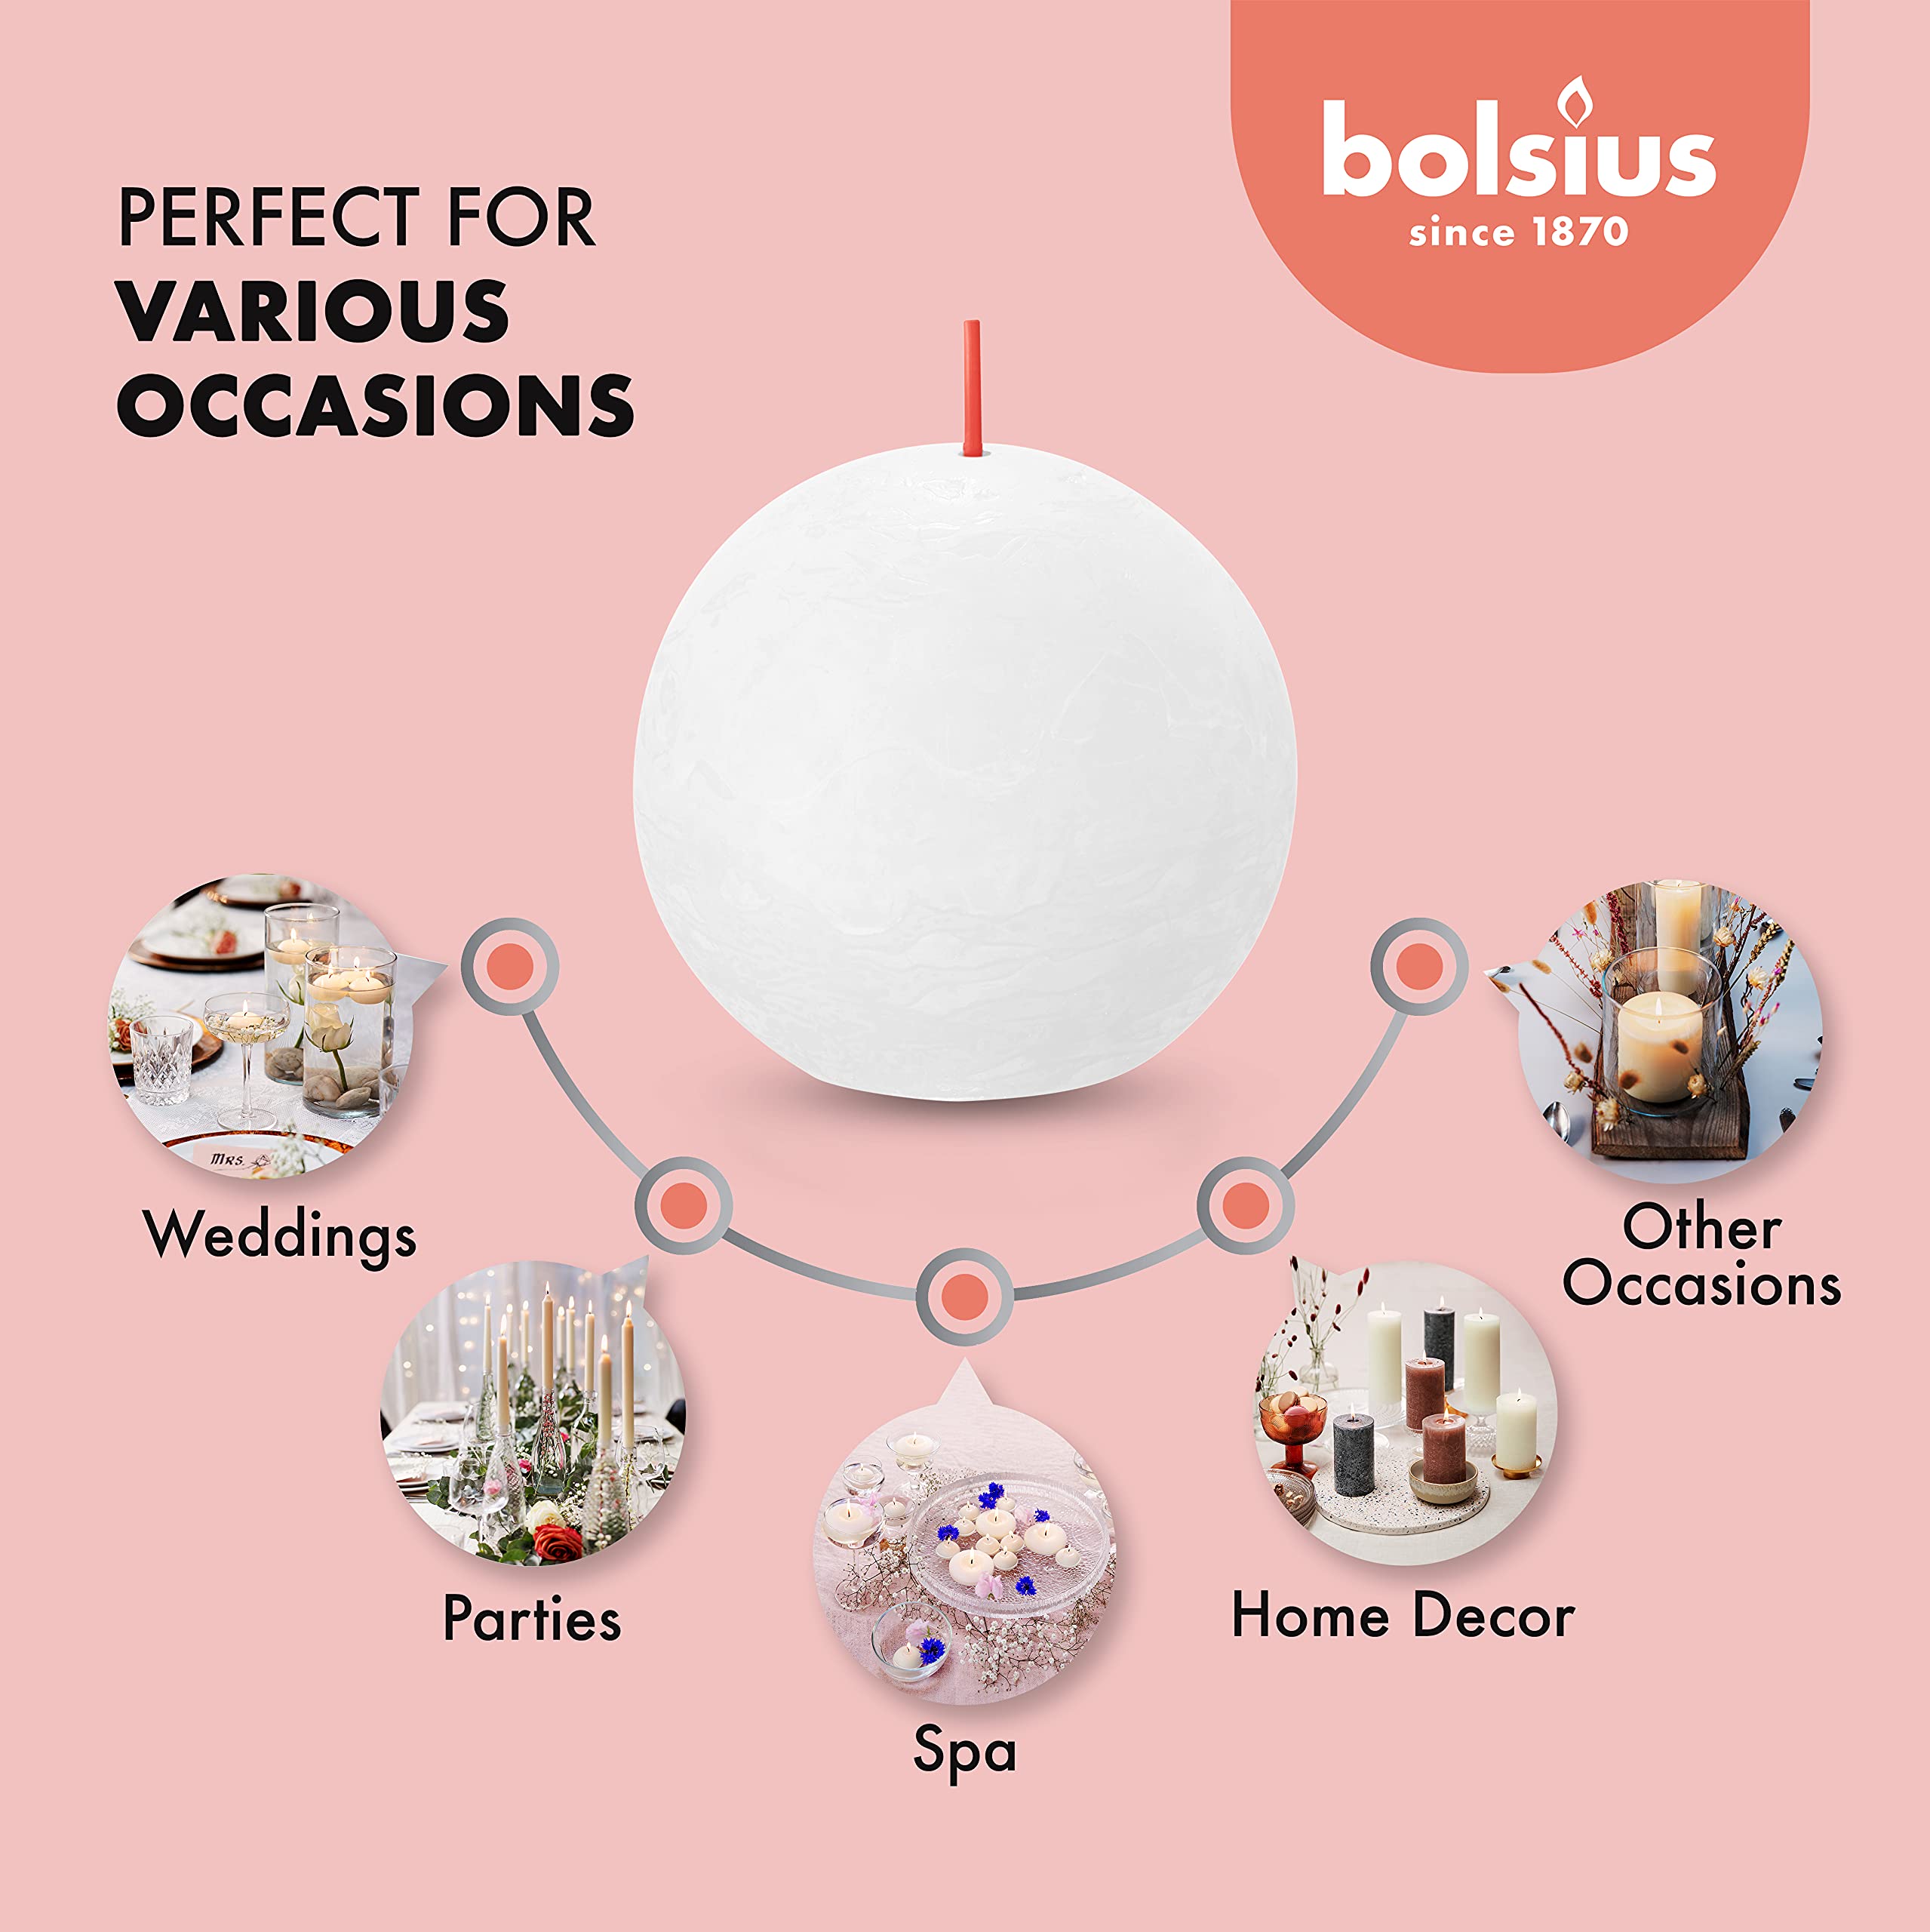 BOLSIUS 3 Pack Pillar Candles - 3 Inch - Premium European Quality - Natural Eco-Friendly Plant-Based Wax - Unscented Dripless Smokeless 25 Hour Party Décor and Wedding Candles  - Acceptable